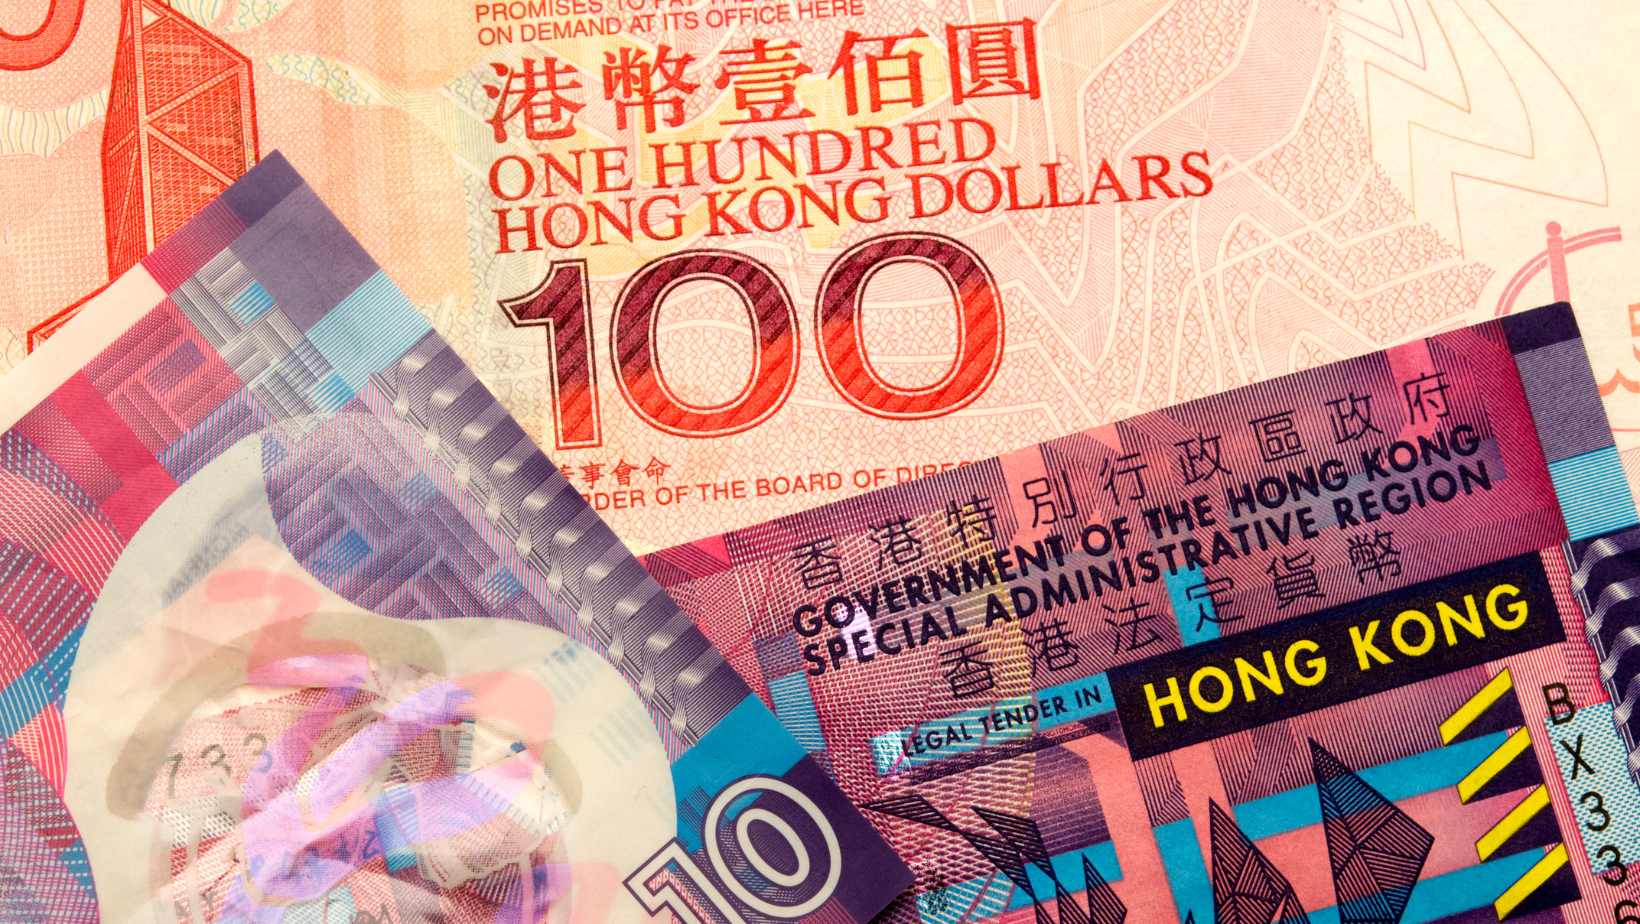 To read Hong Kong’s future as a crypto hub, look closely at its colorful paper money: Opinion